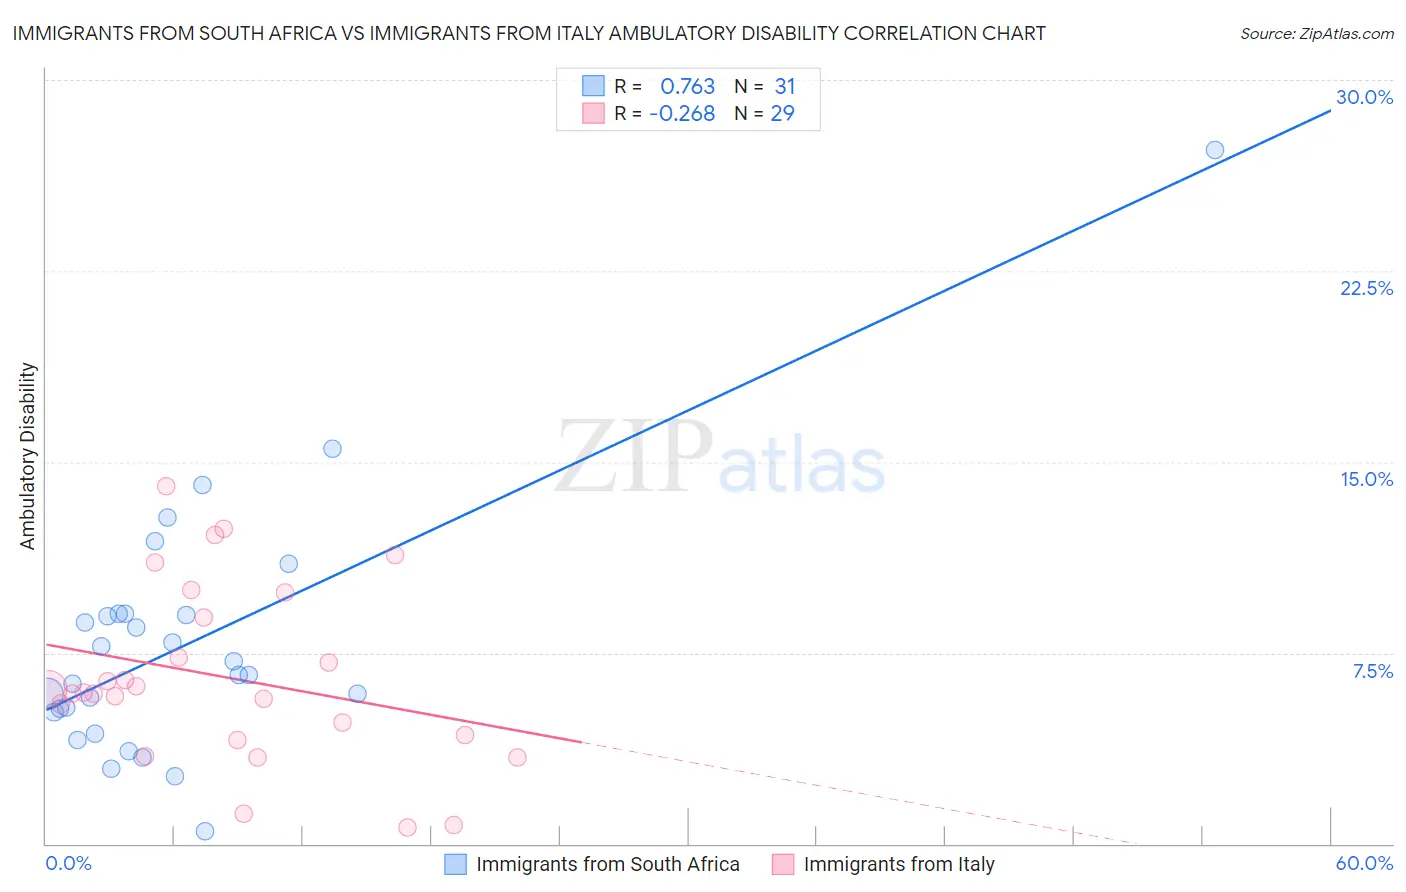 Immigrants from South Africa vs Immigrants from Italy Ambulatory Disability